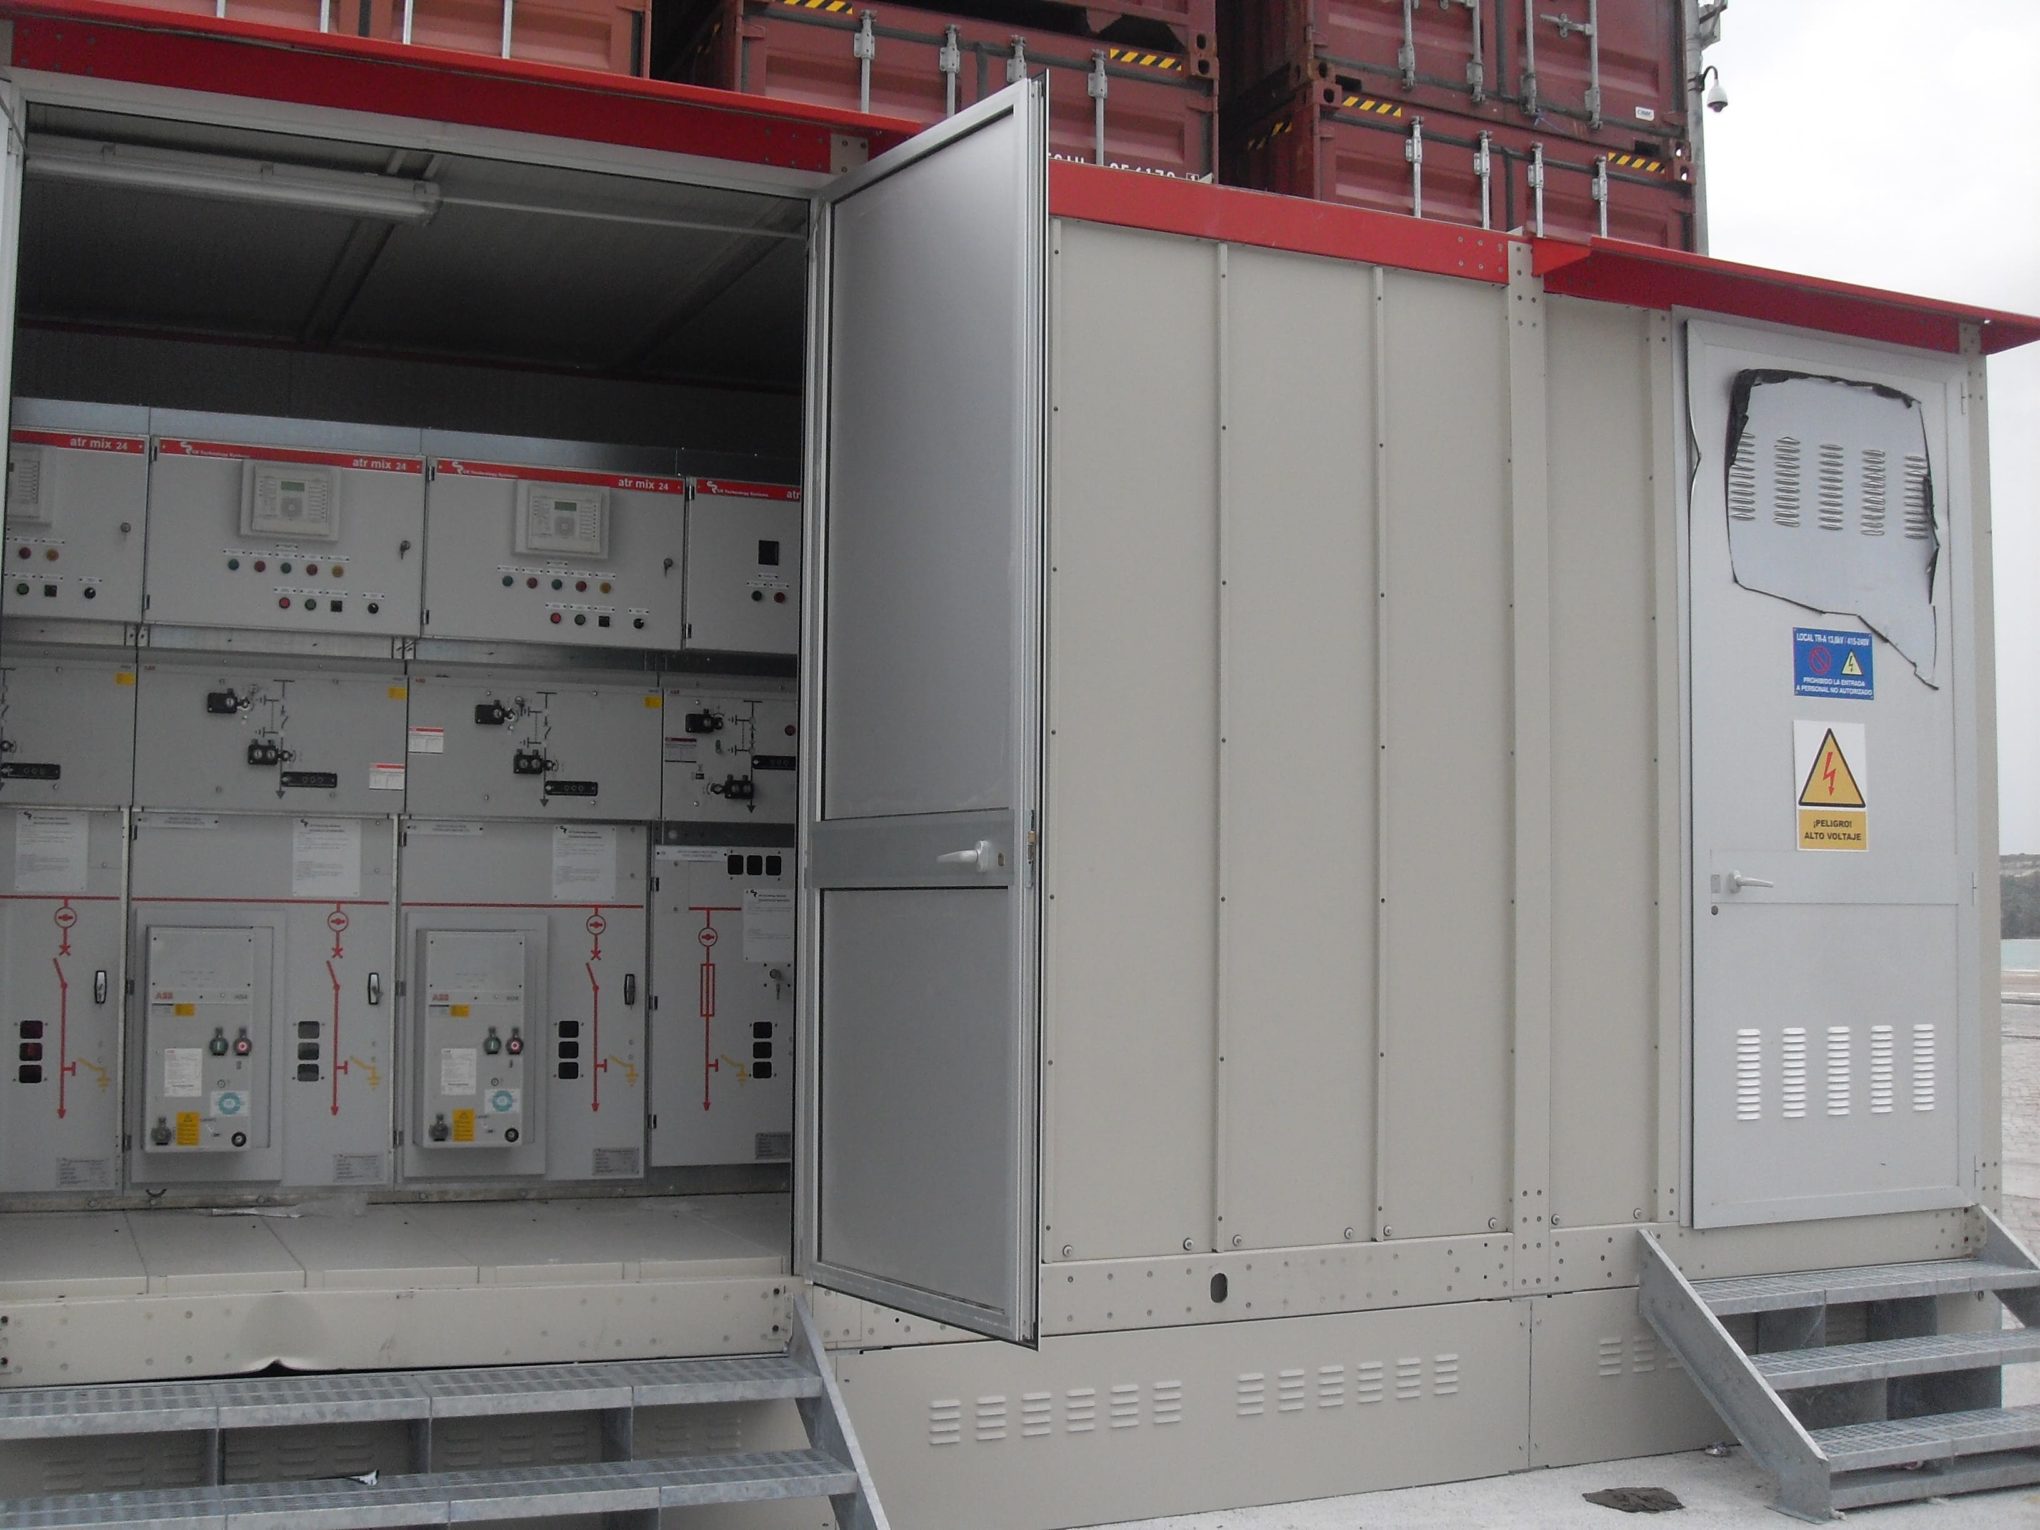 Compact substation with MV electrical switchgear